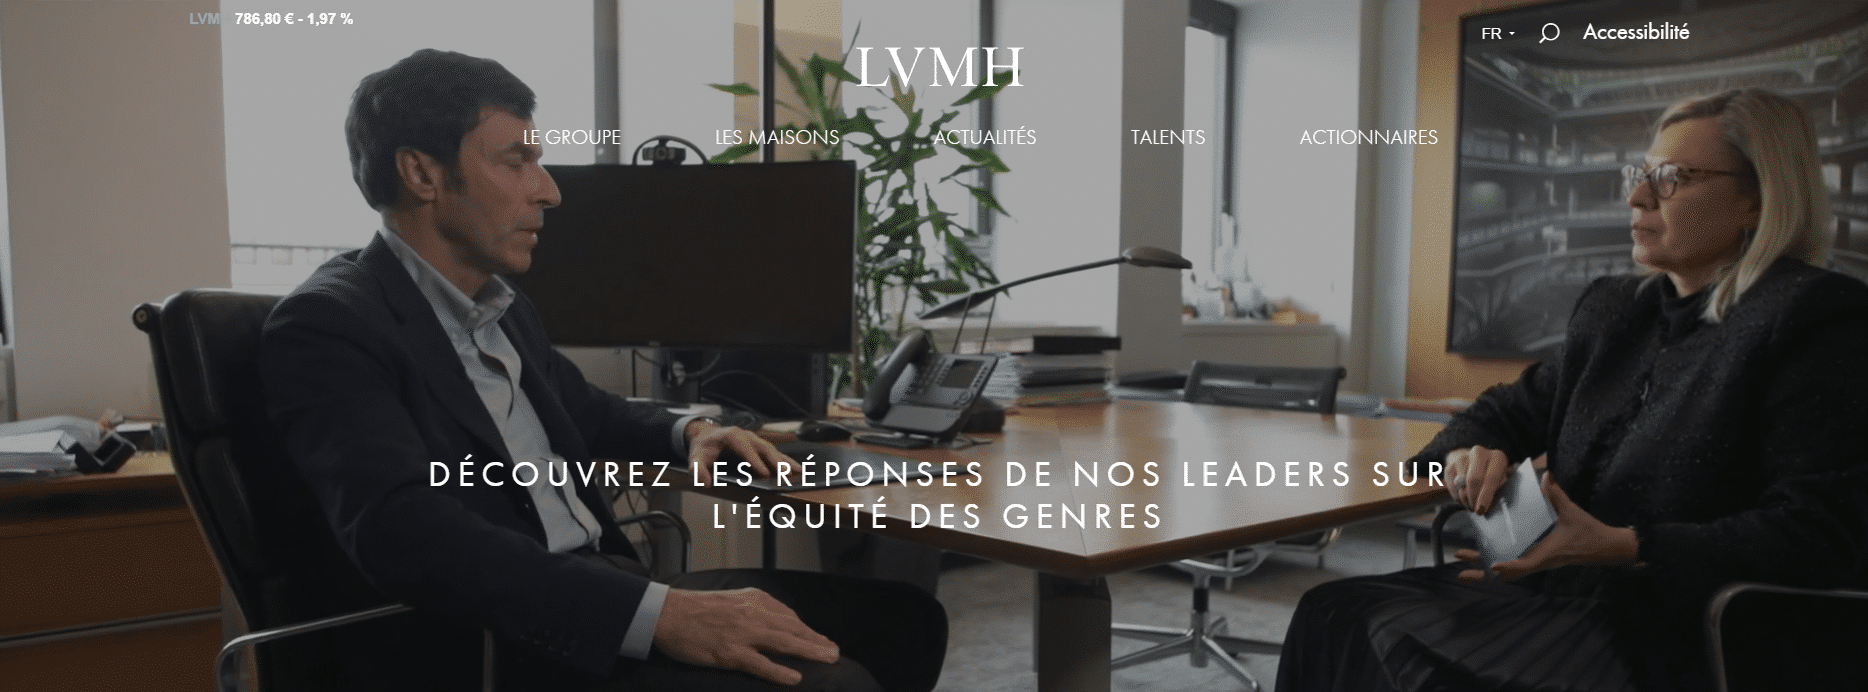 exemple site wordpress groupe lvmh